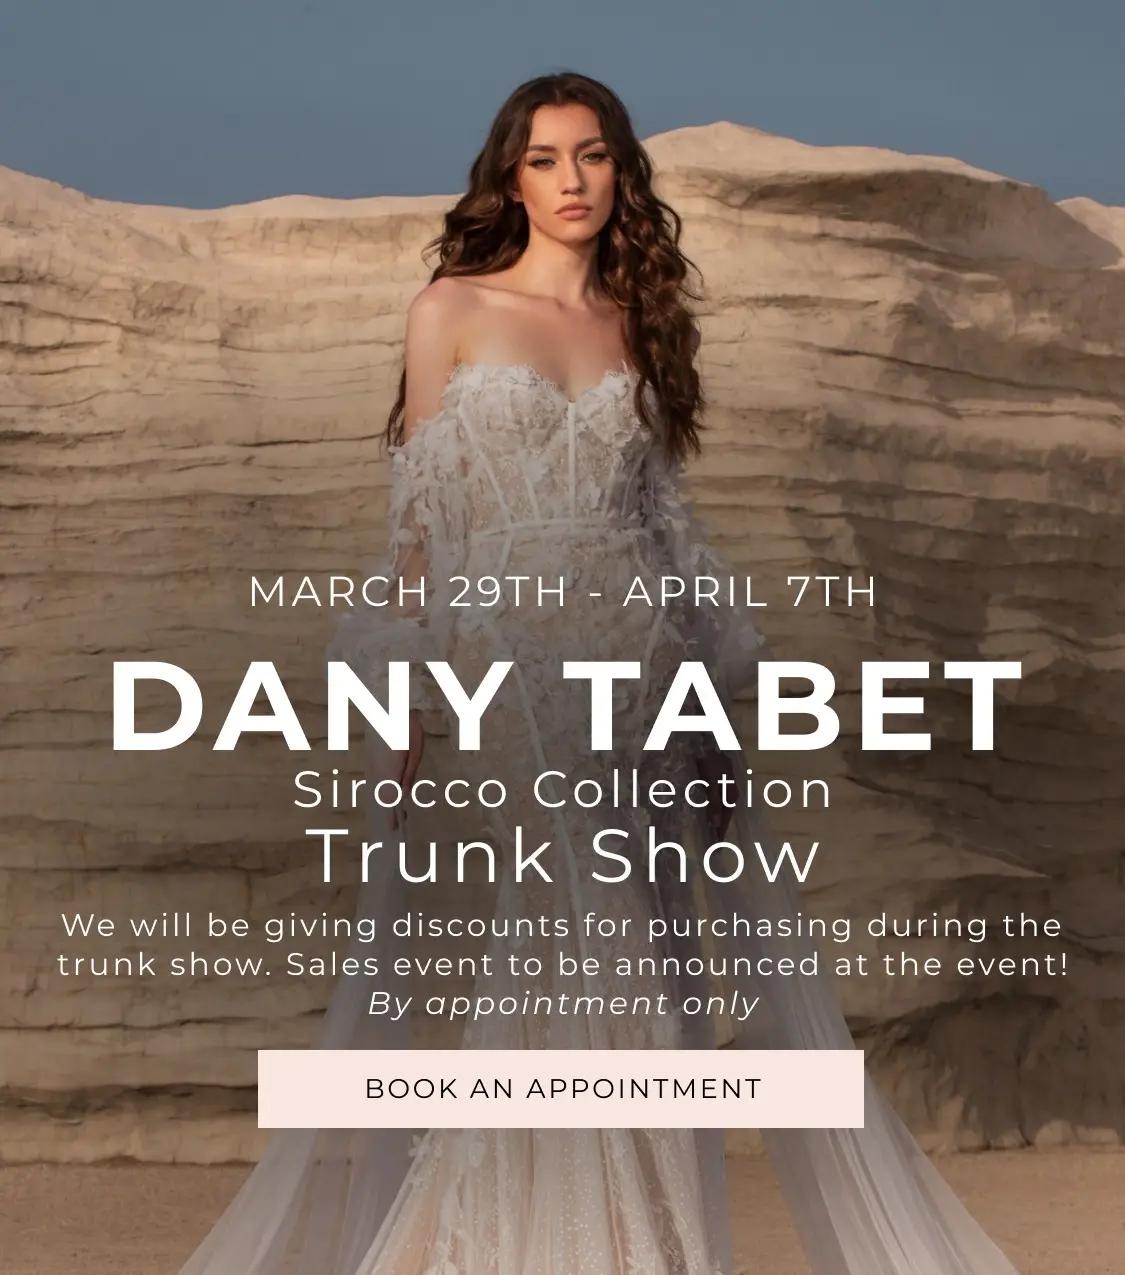 Dany Tabet Sirocco Collection Trunk Show Banner Mobile